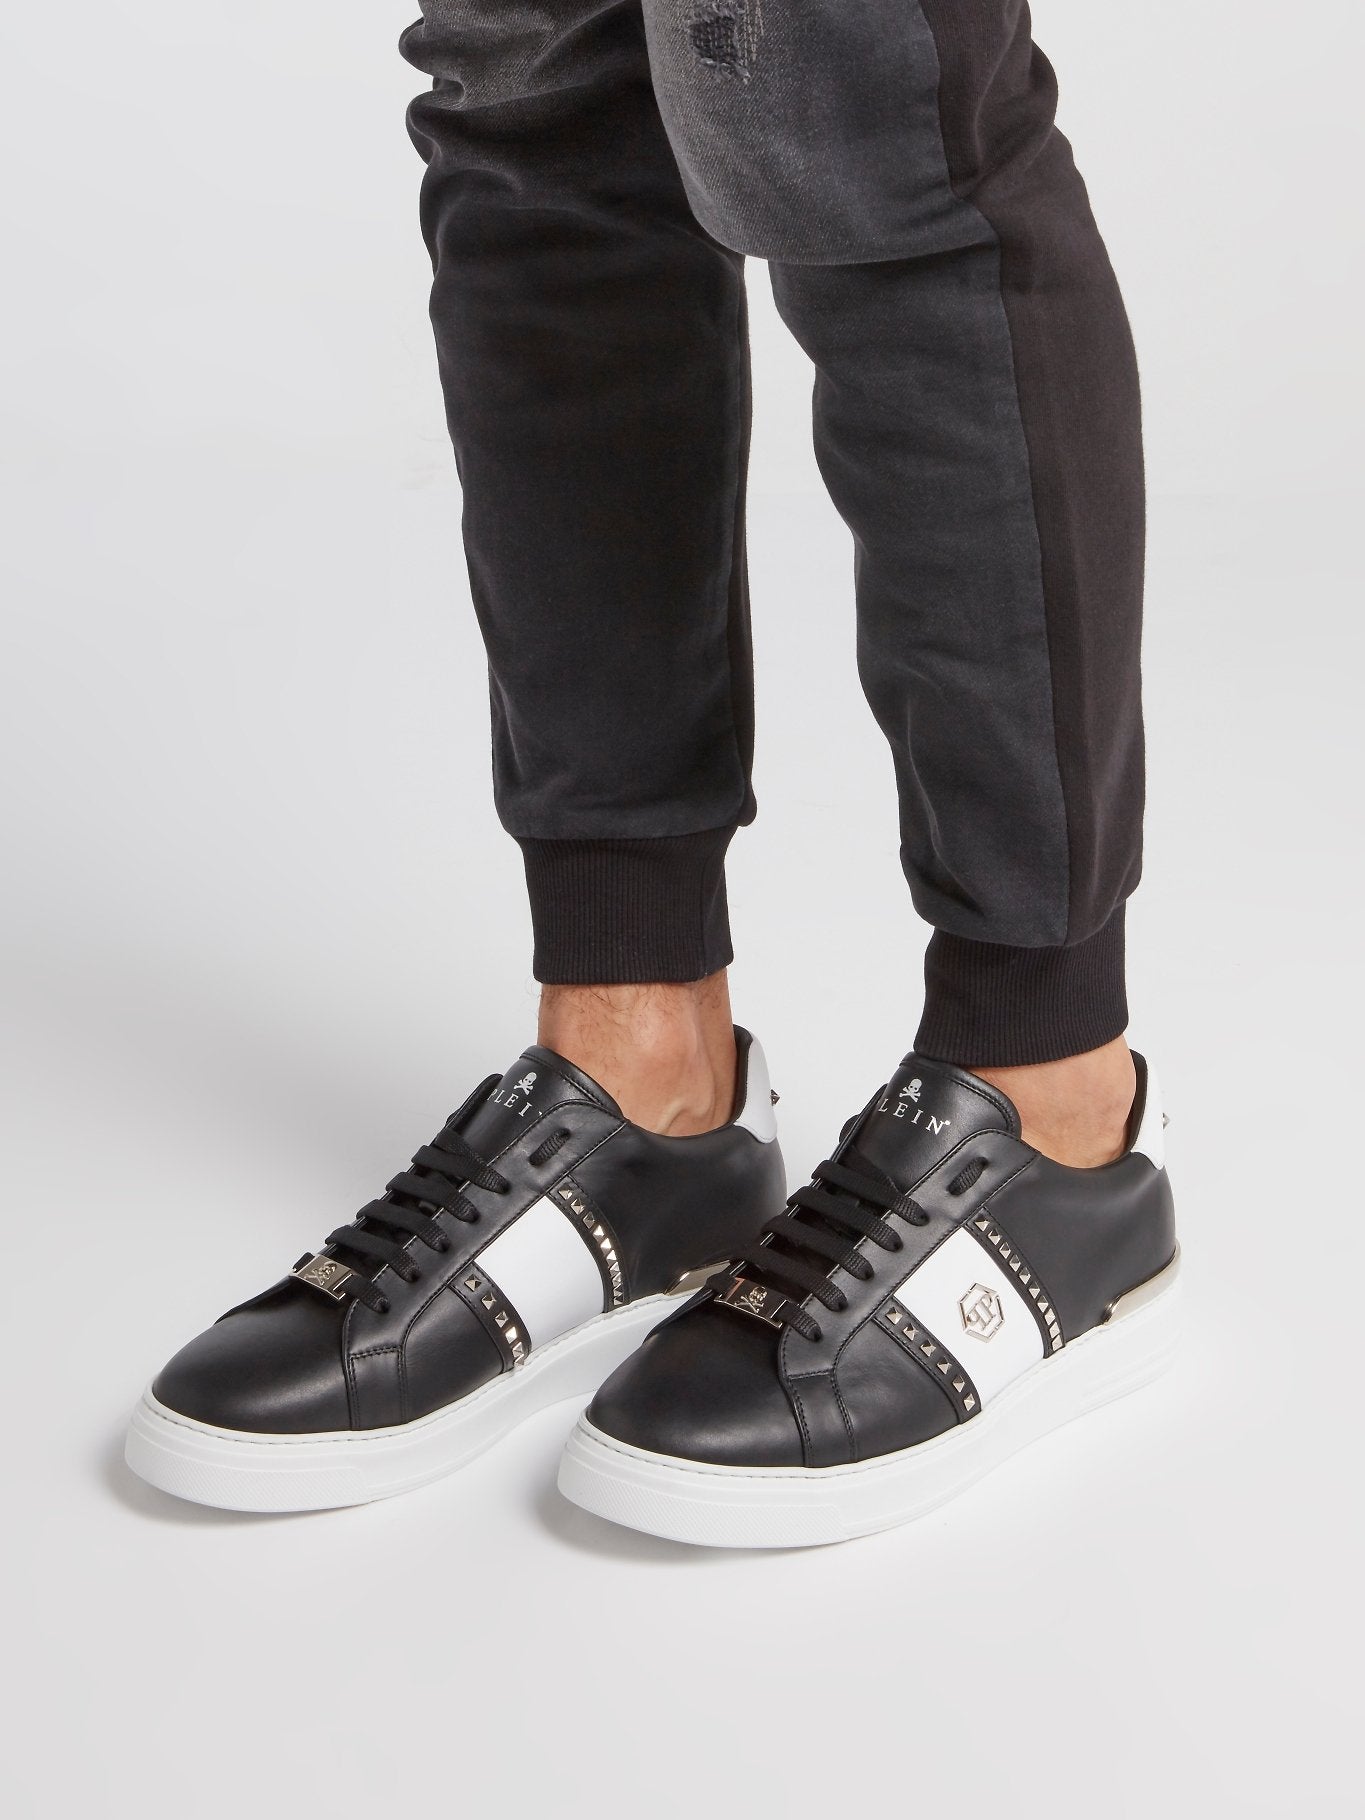 Black Contrast Studded Leather Sneakers